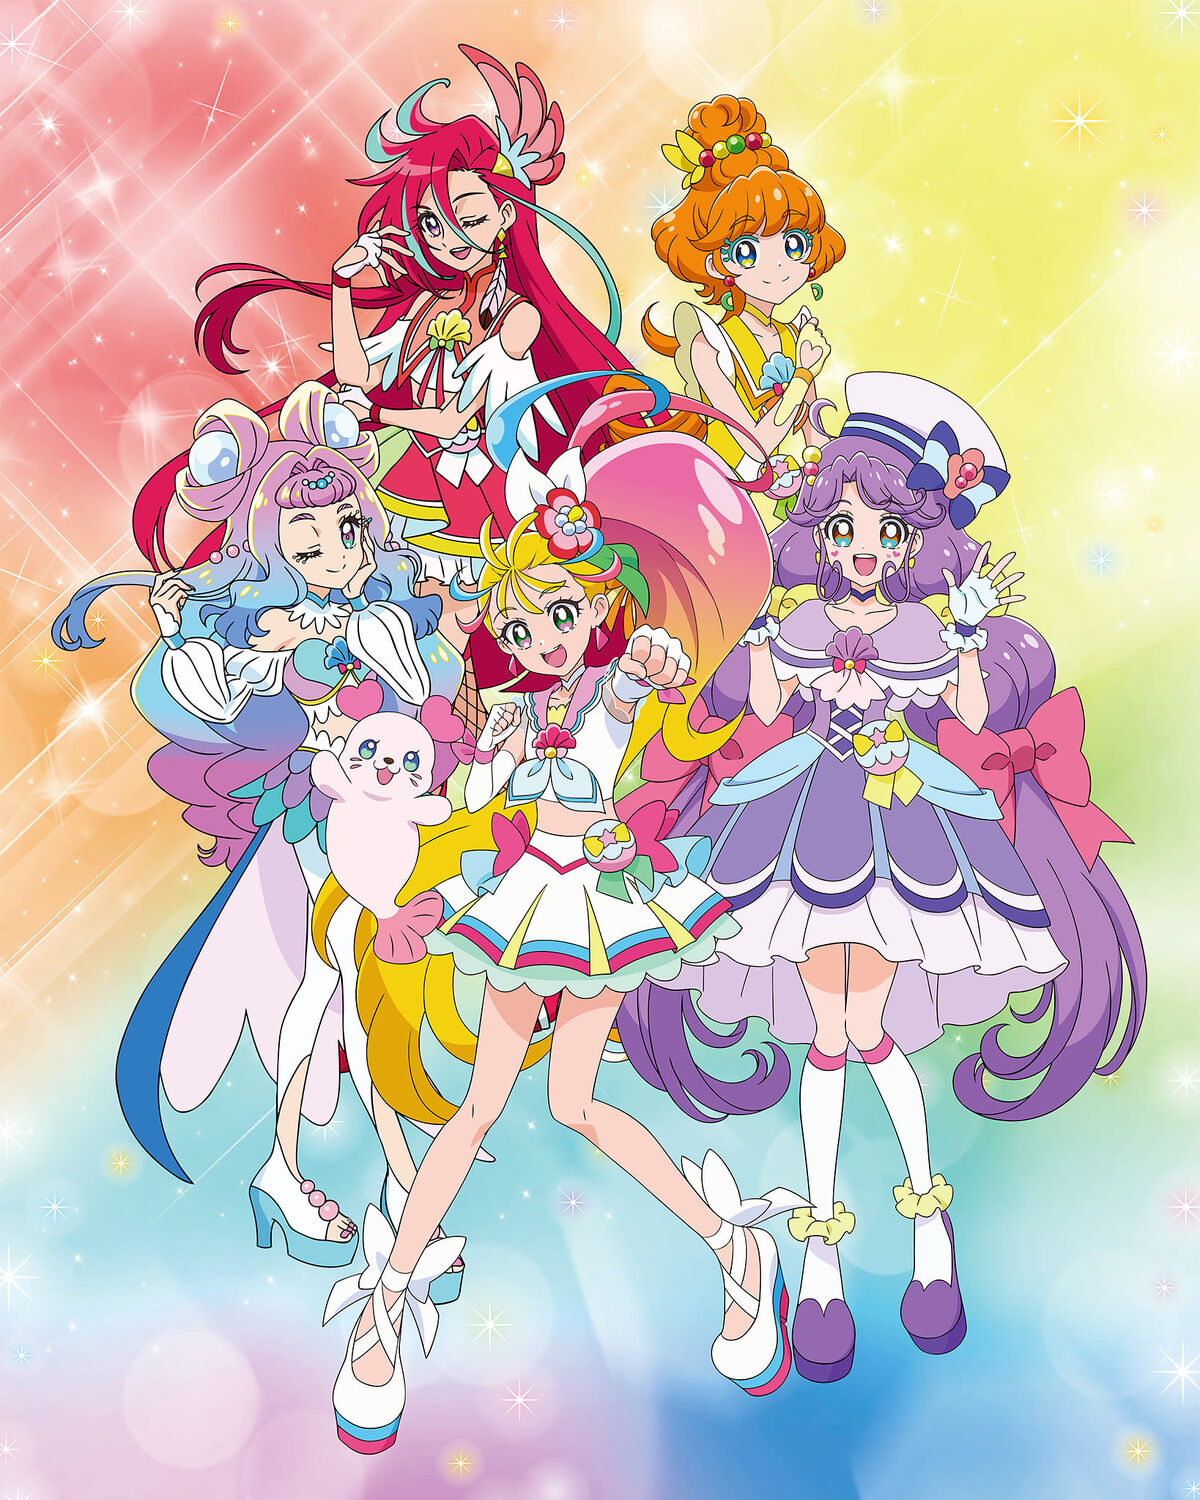 Tropical-Rouge! Precure (TV) - Anime News Network